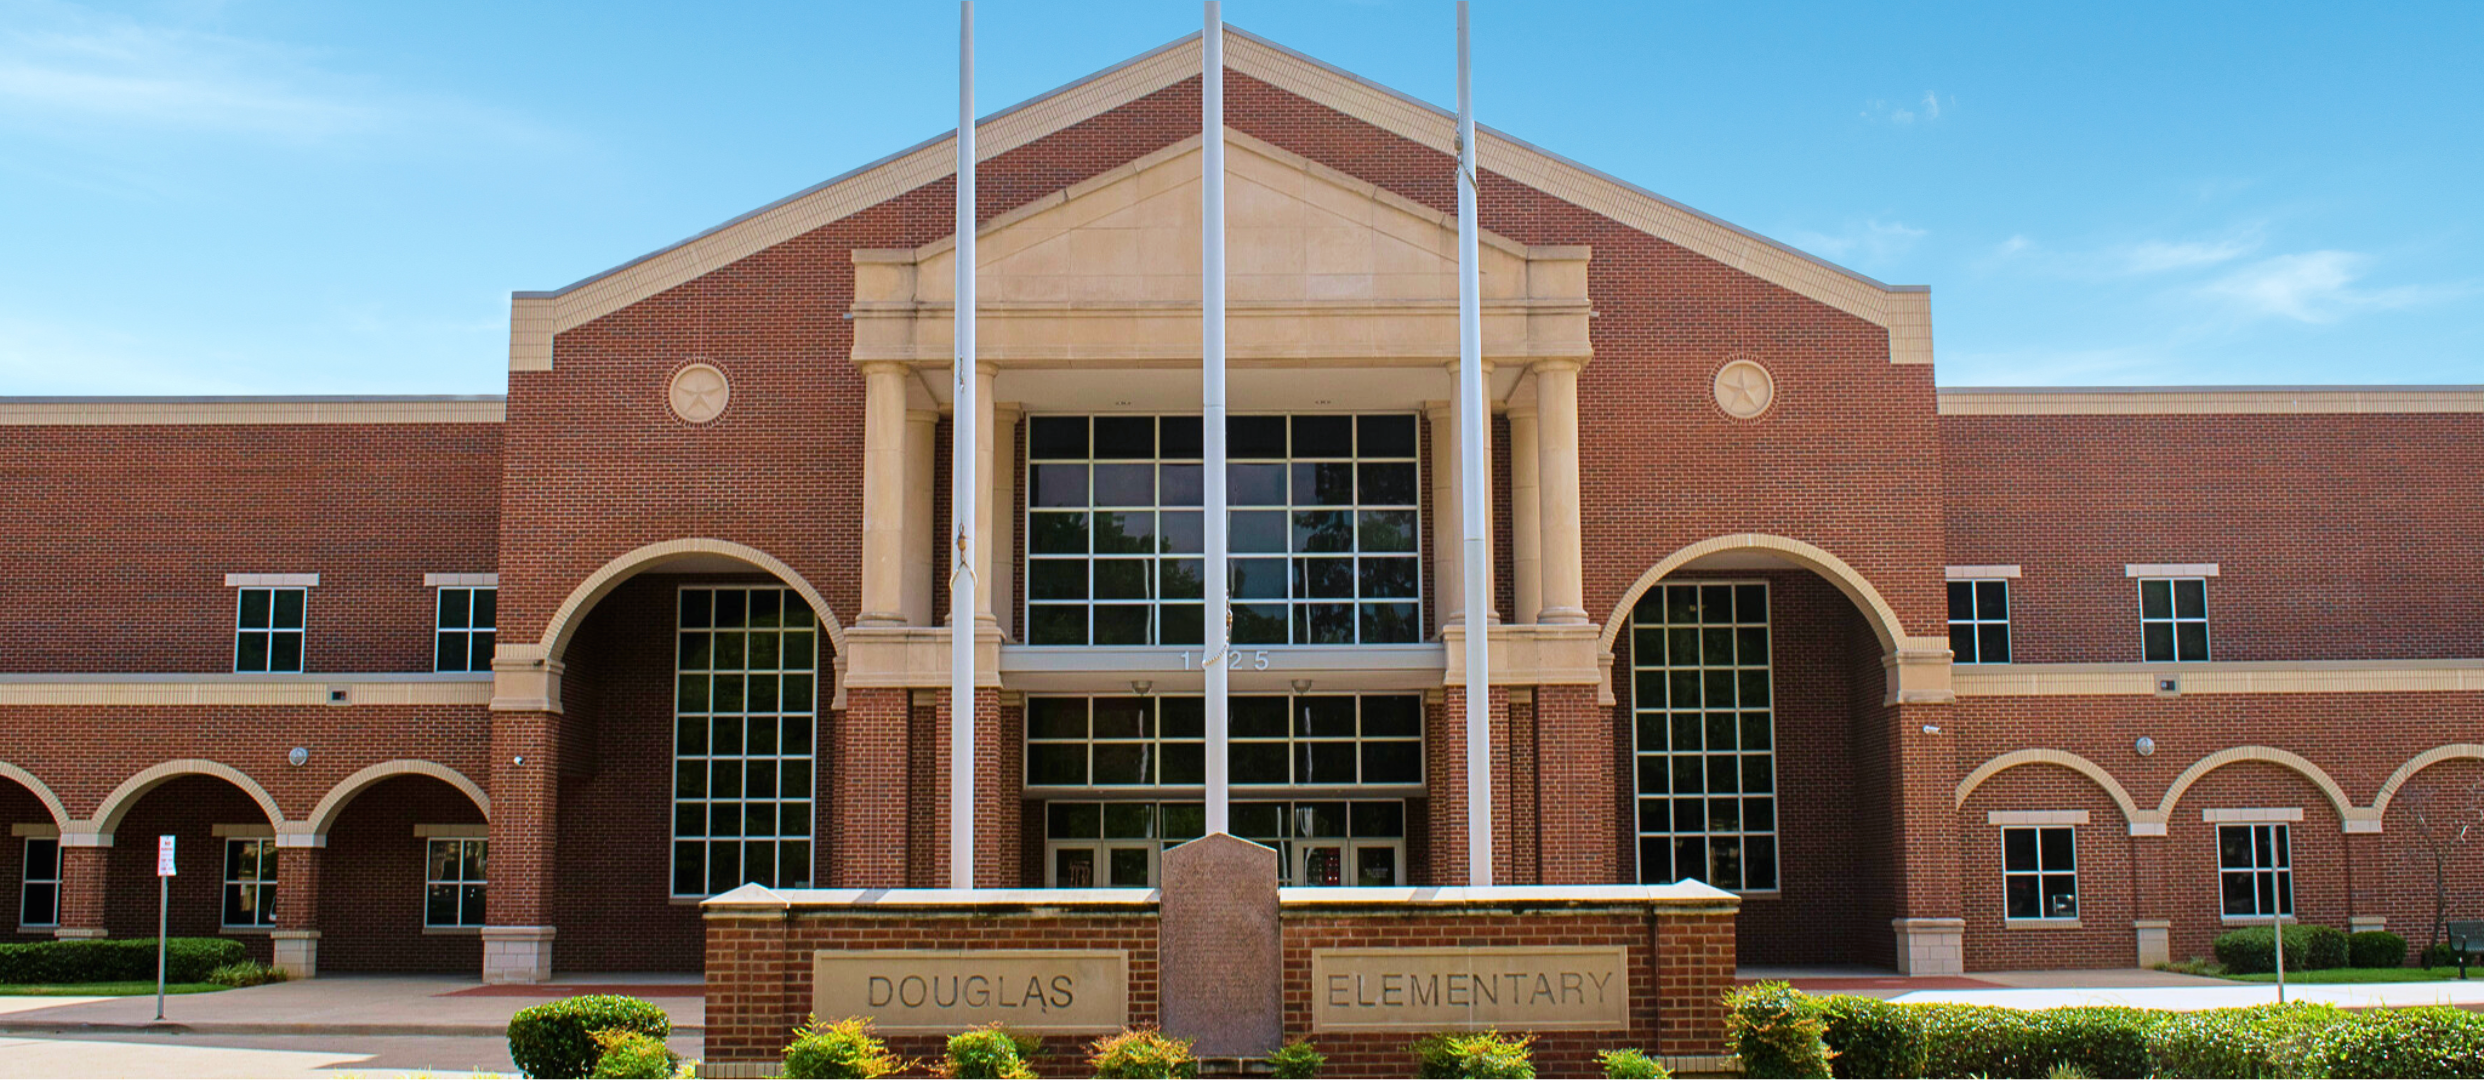 Douglas Elementary Red Brick Building main entrance in front of 3 flag poles